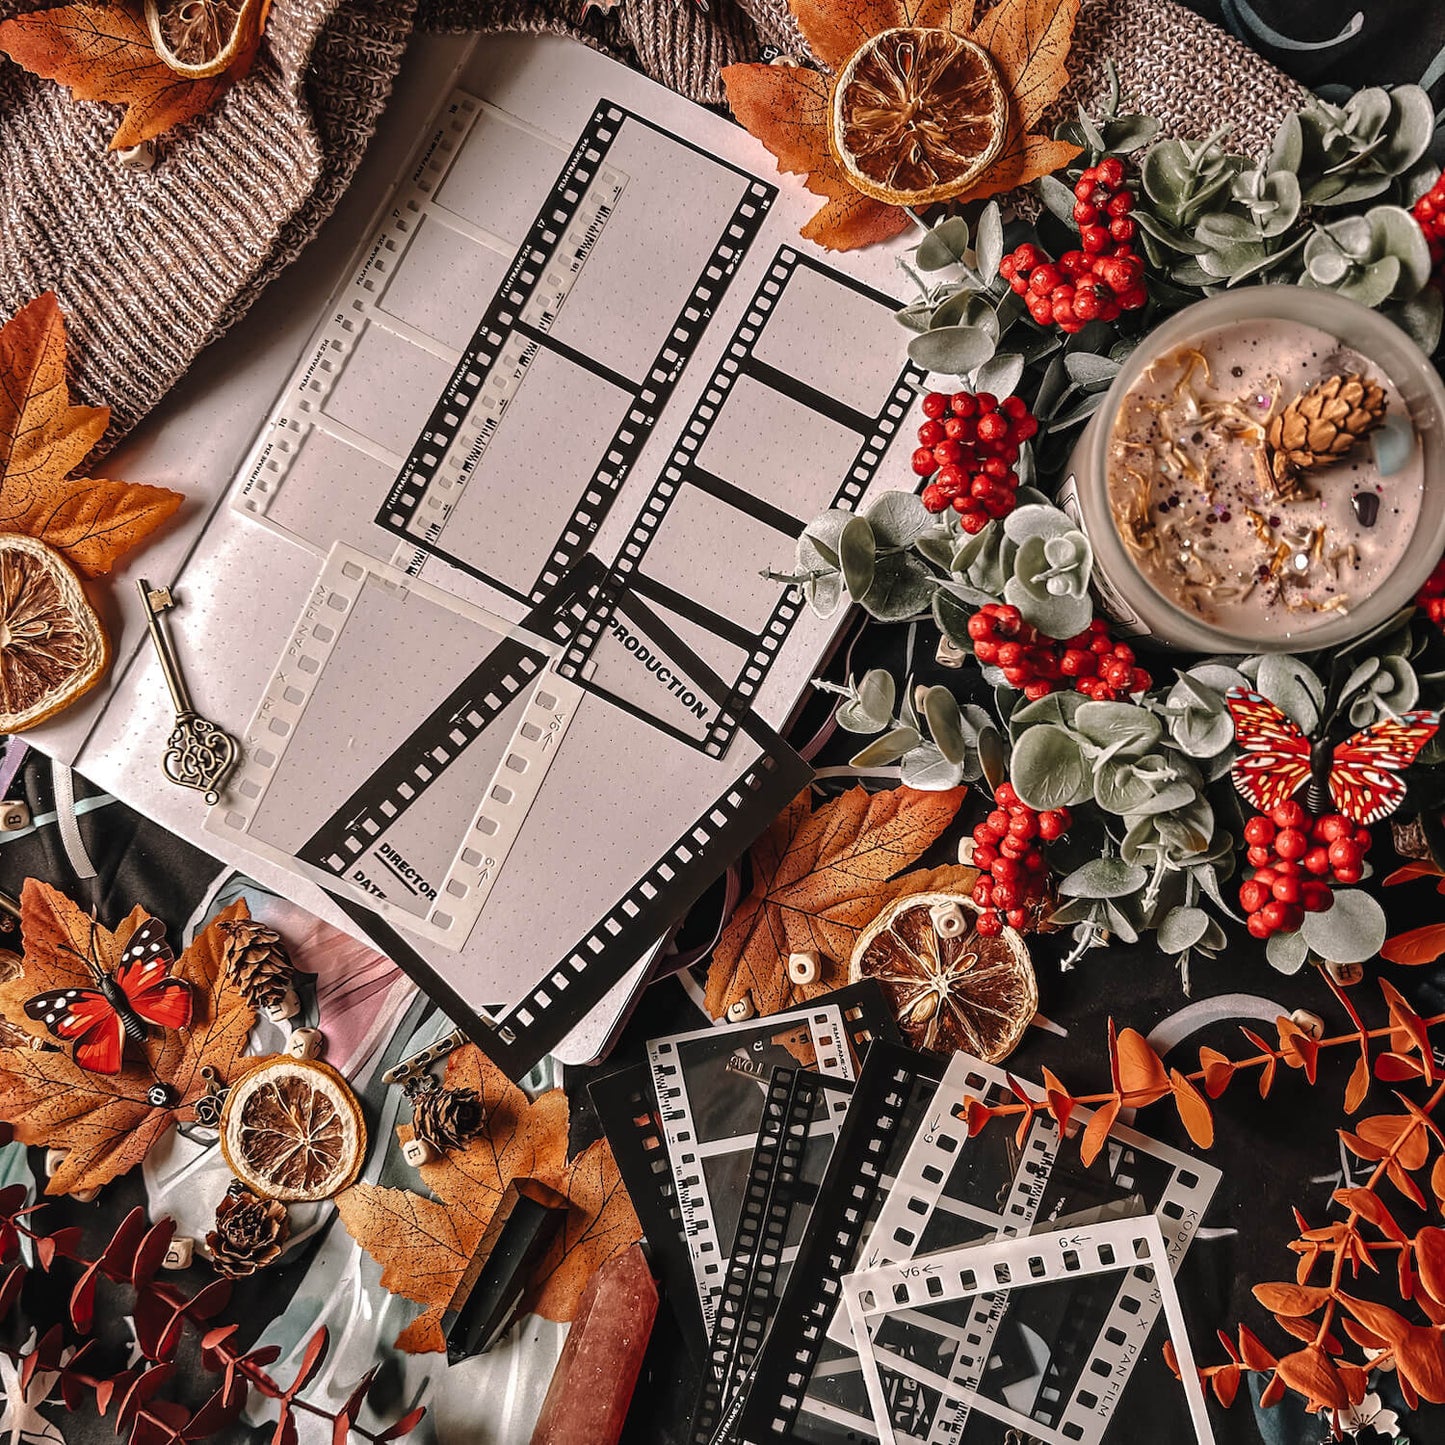 Black and white PET film stickers on a table filled with autumn leaves and a sweater